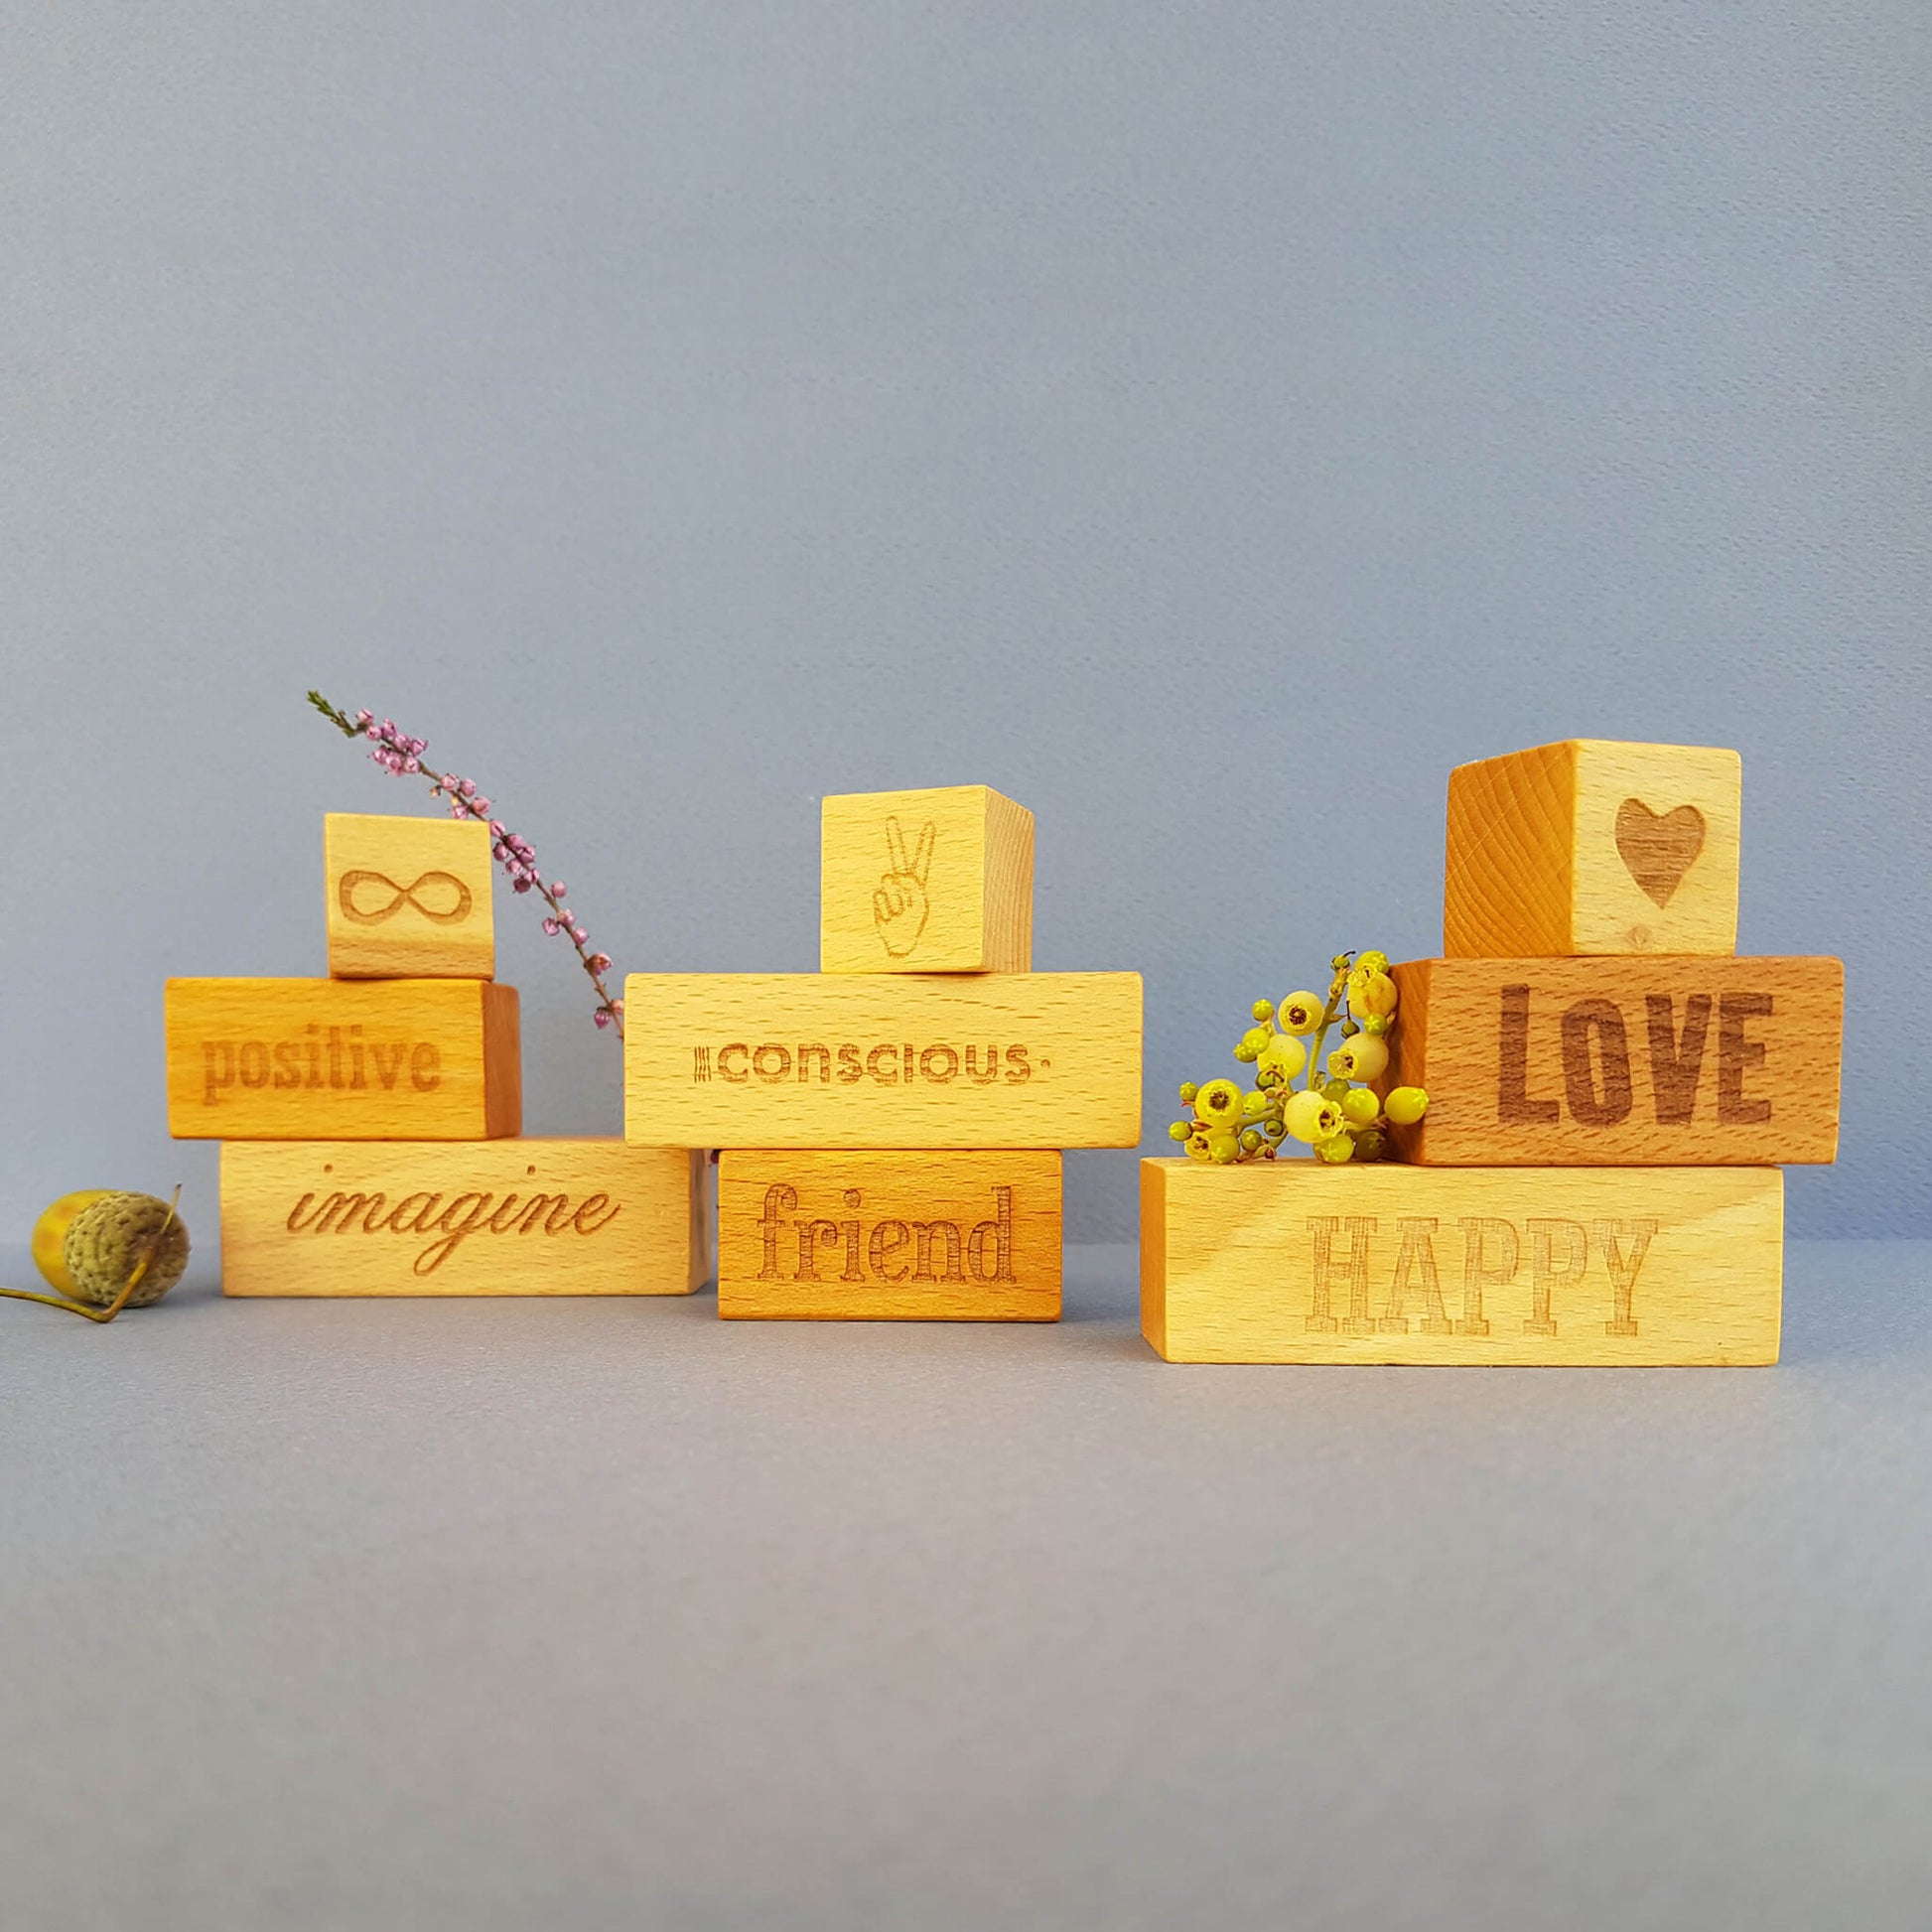 On my Mind - Conscious Friend 3 Engraved Wooden Blocks - Unik by Nature